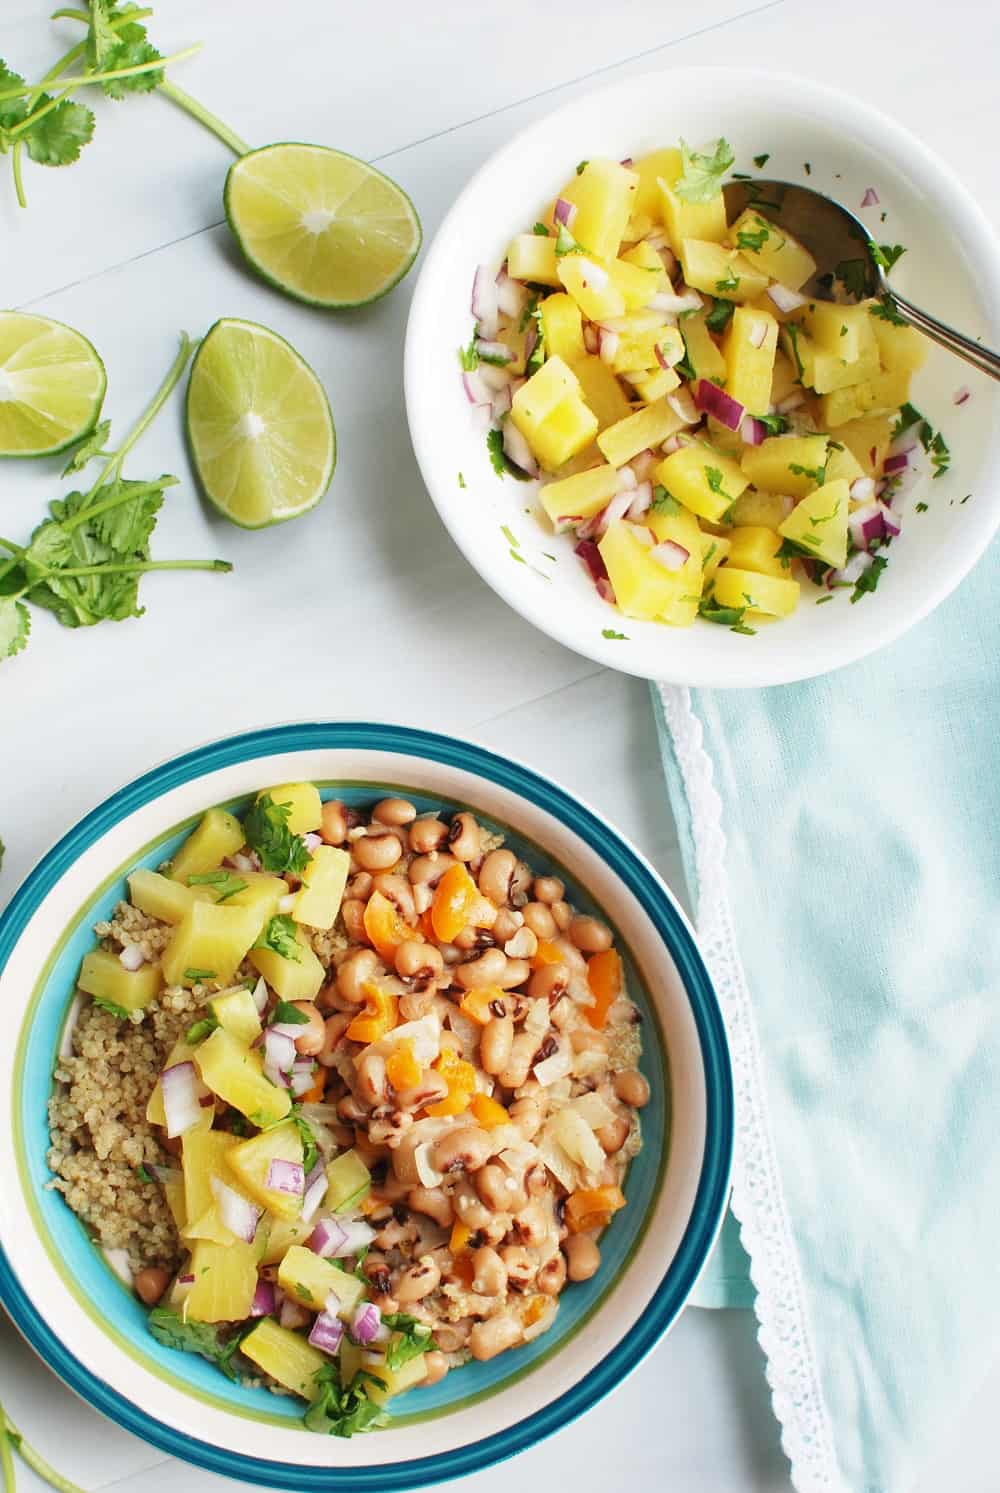 Vegan black eyed peas and quinoa next to a bowl of pineapple salsa